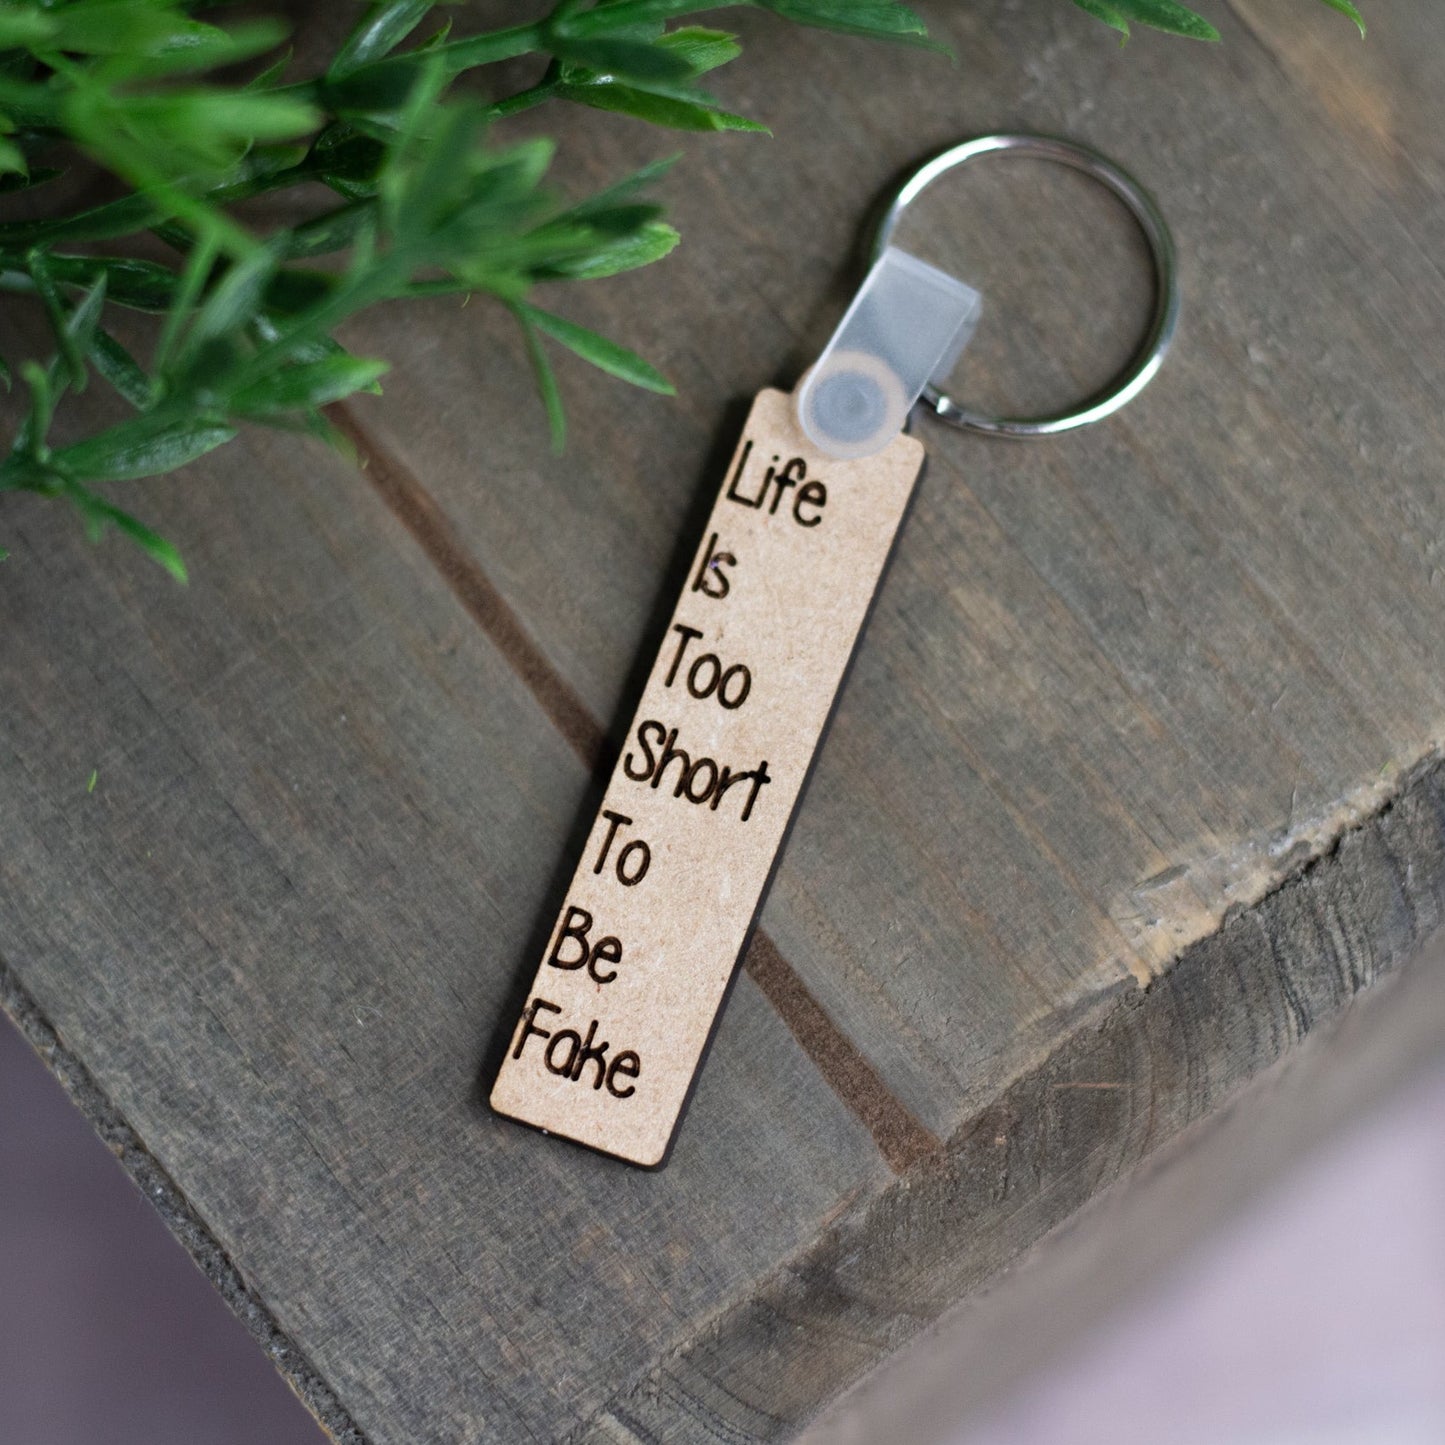 "Life Is Too Short To Be Fake" Keychain